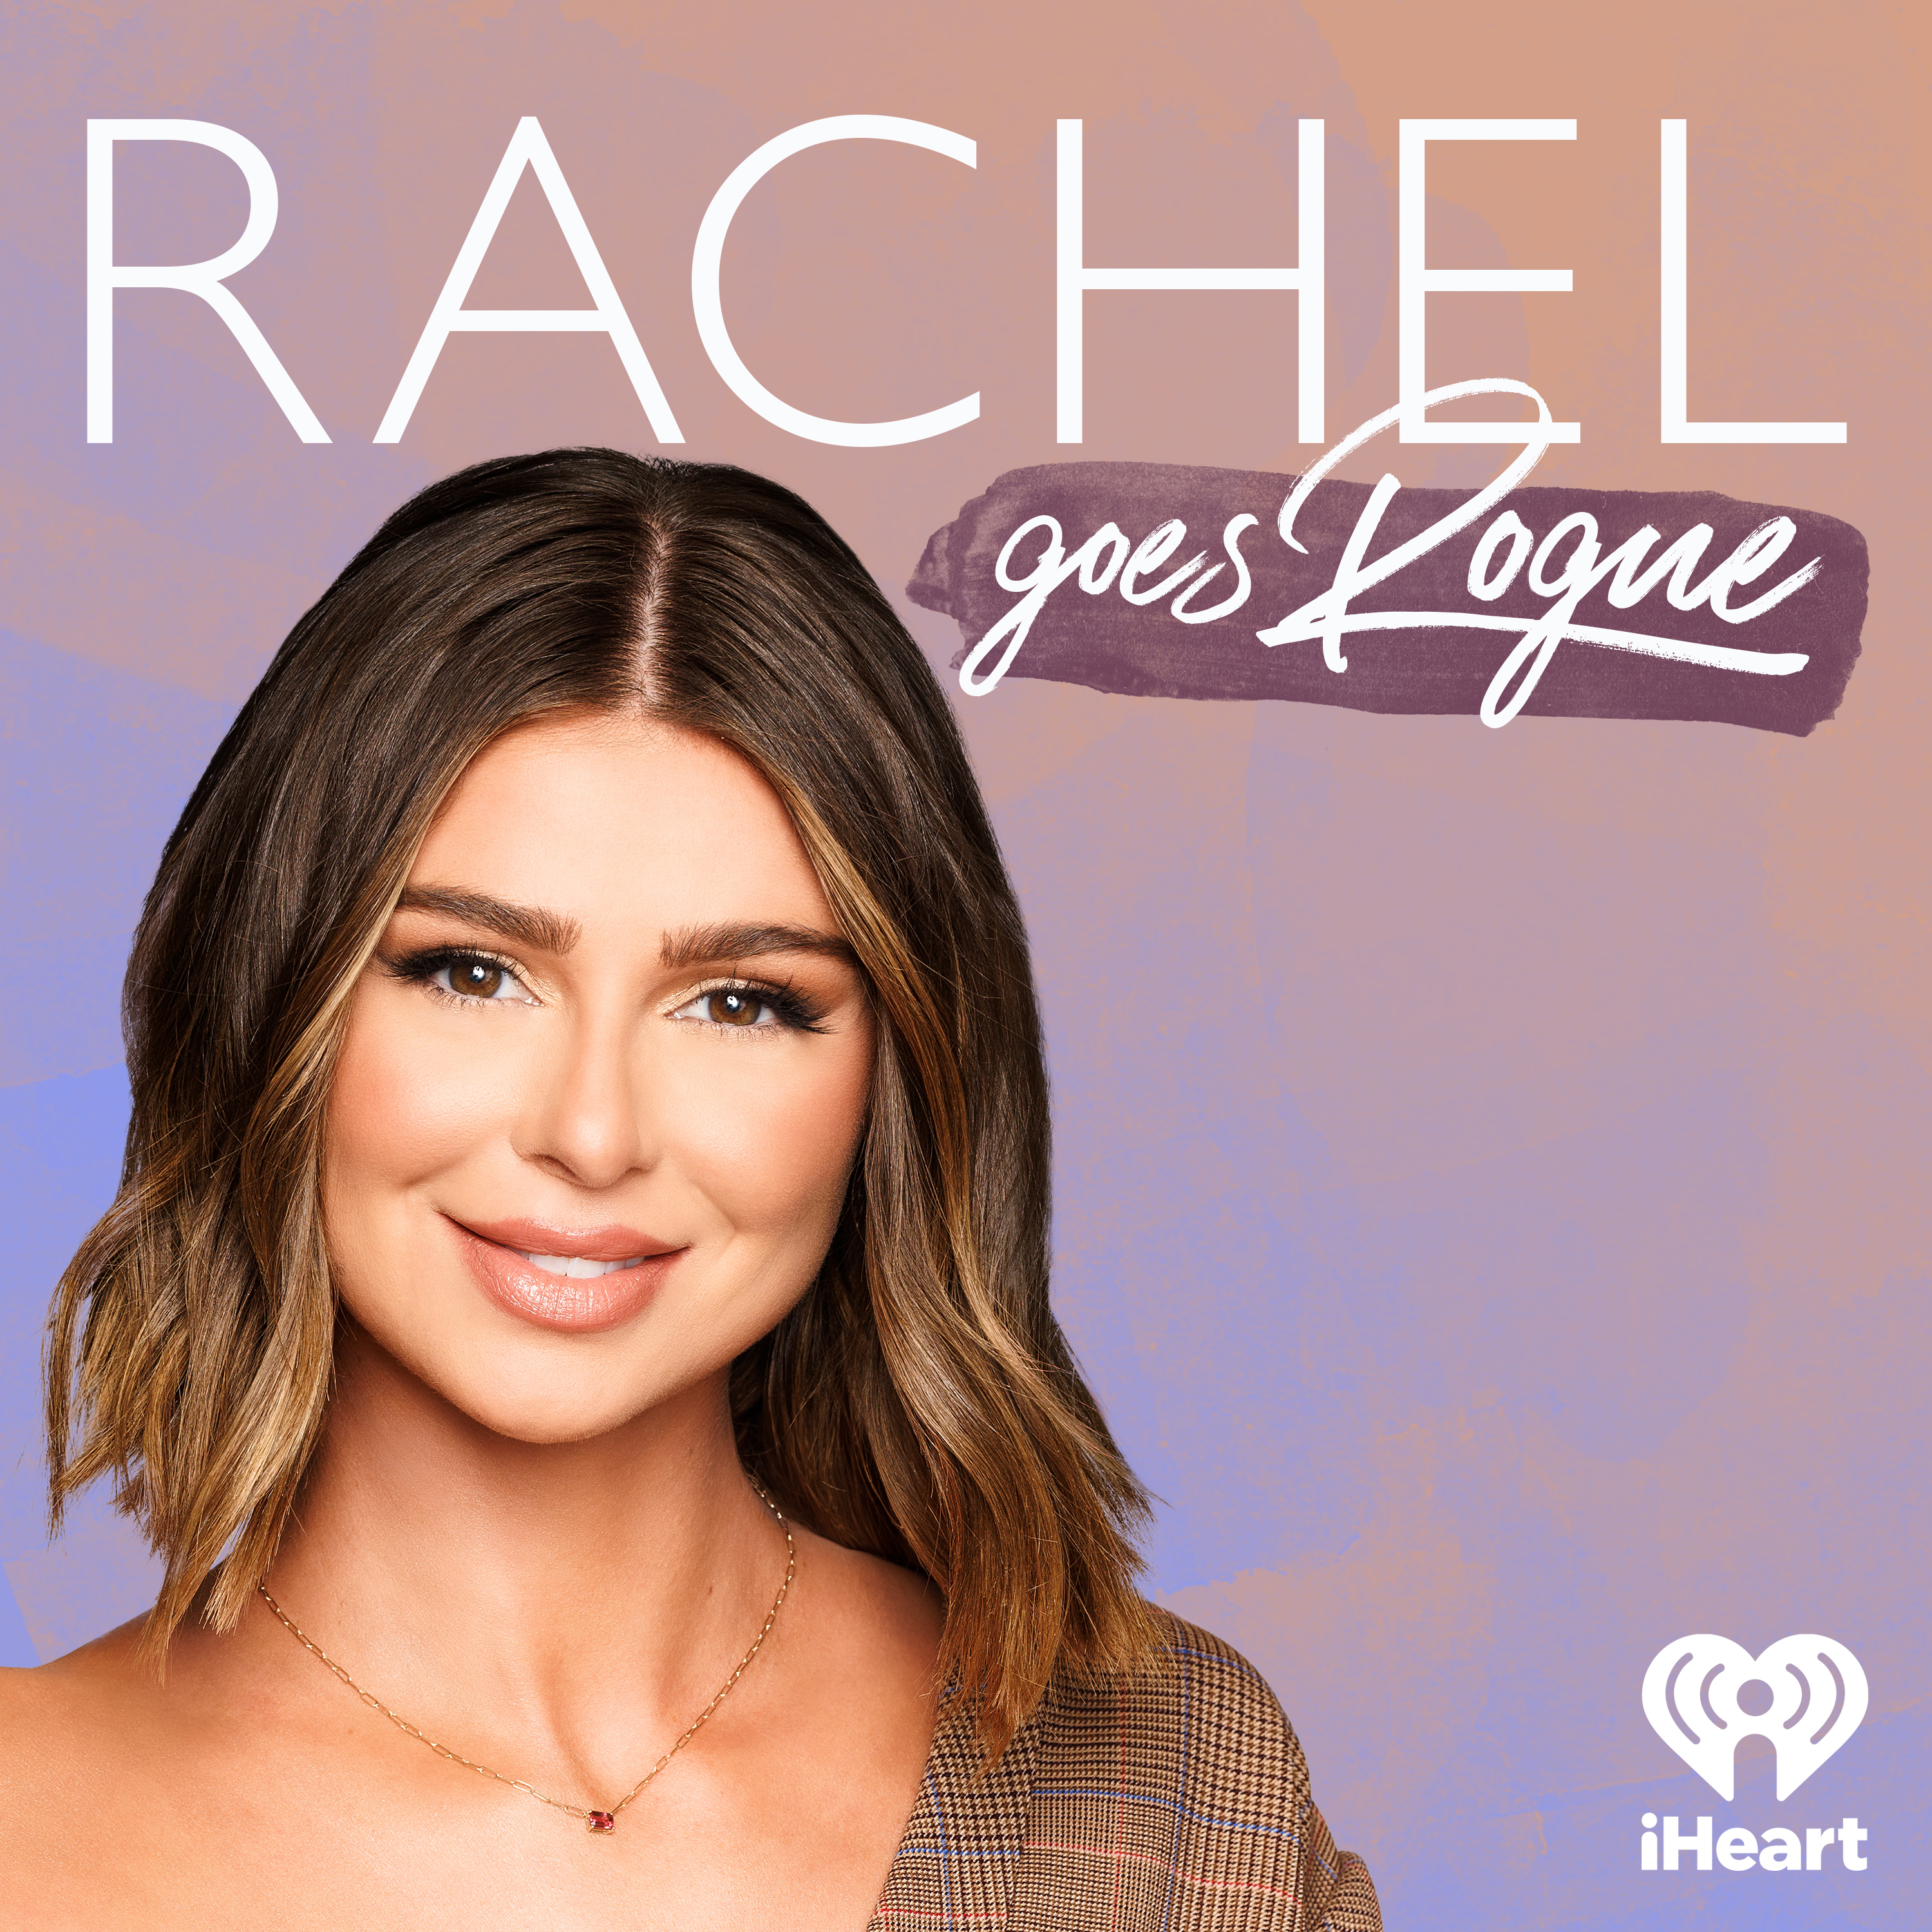 Rachel's "Going" Rogue by iHeartPodcasts